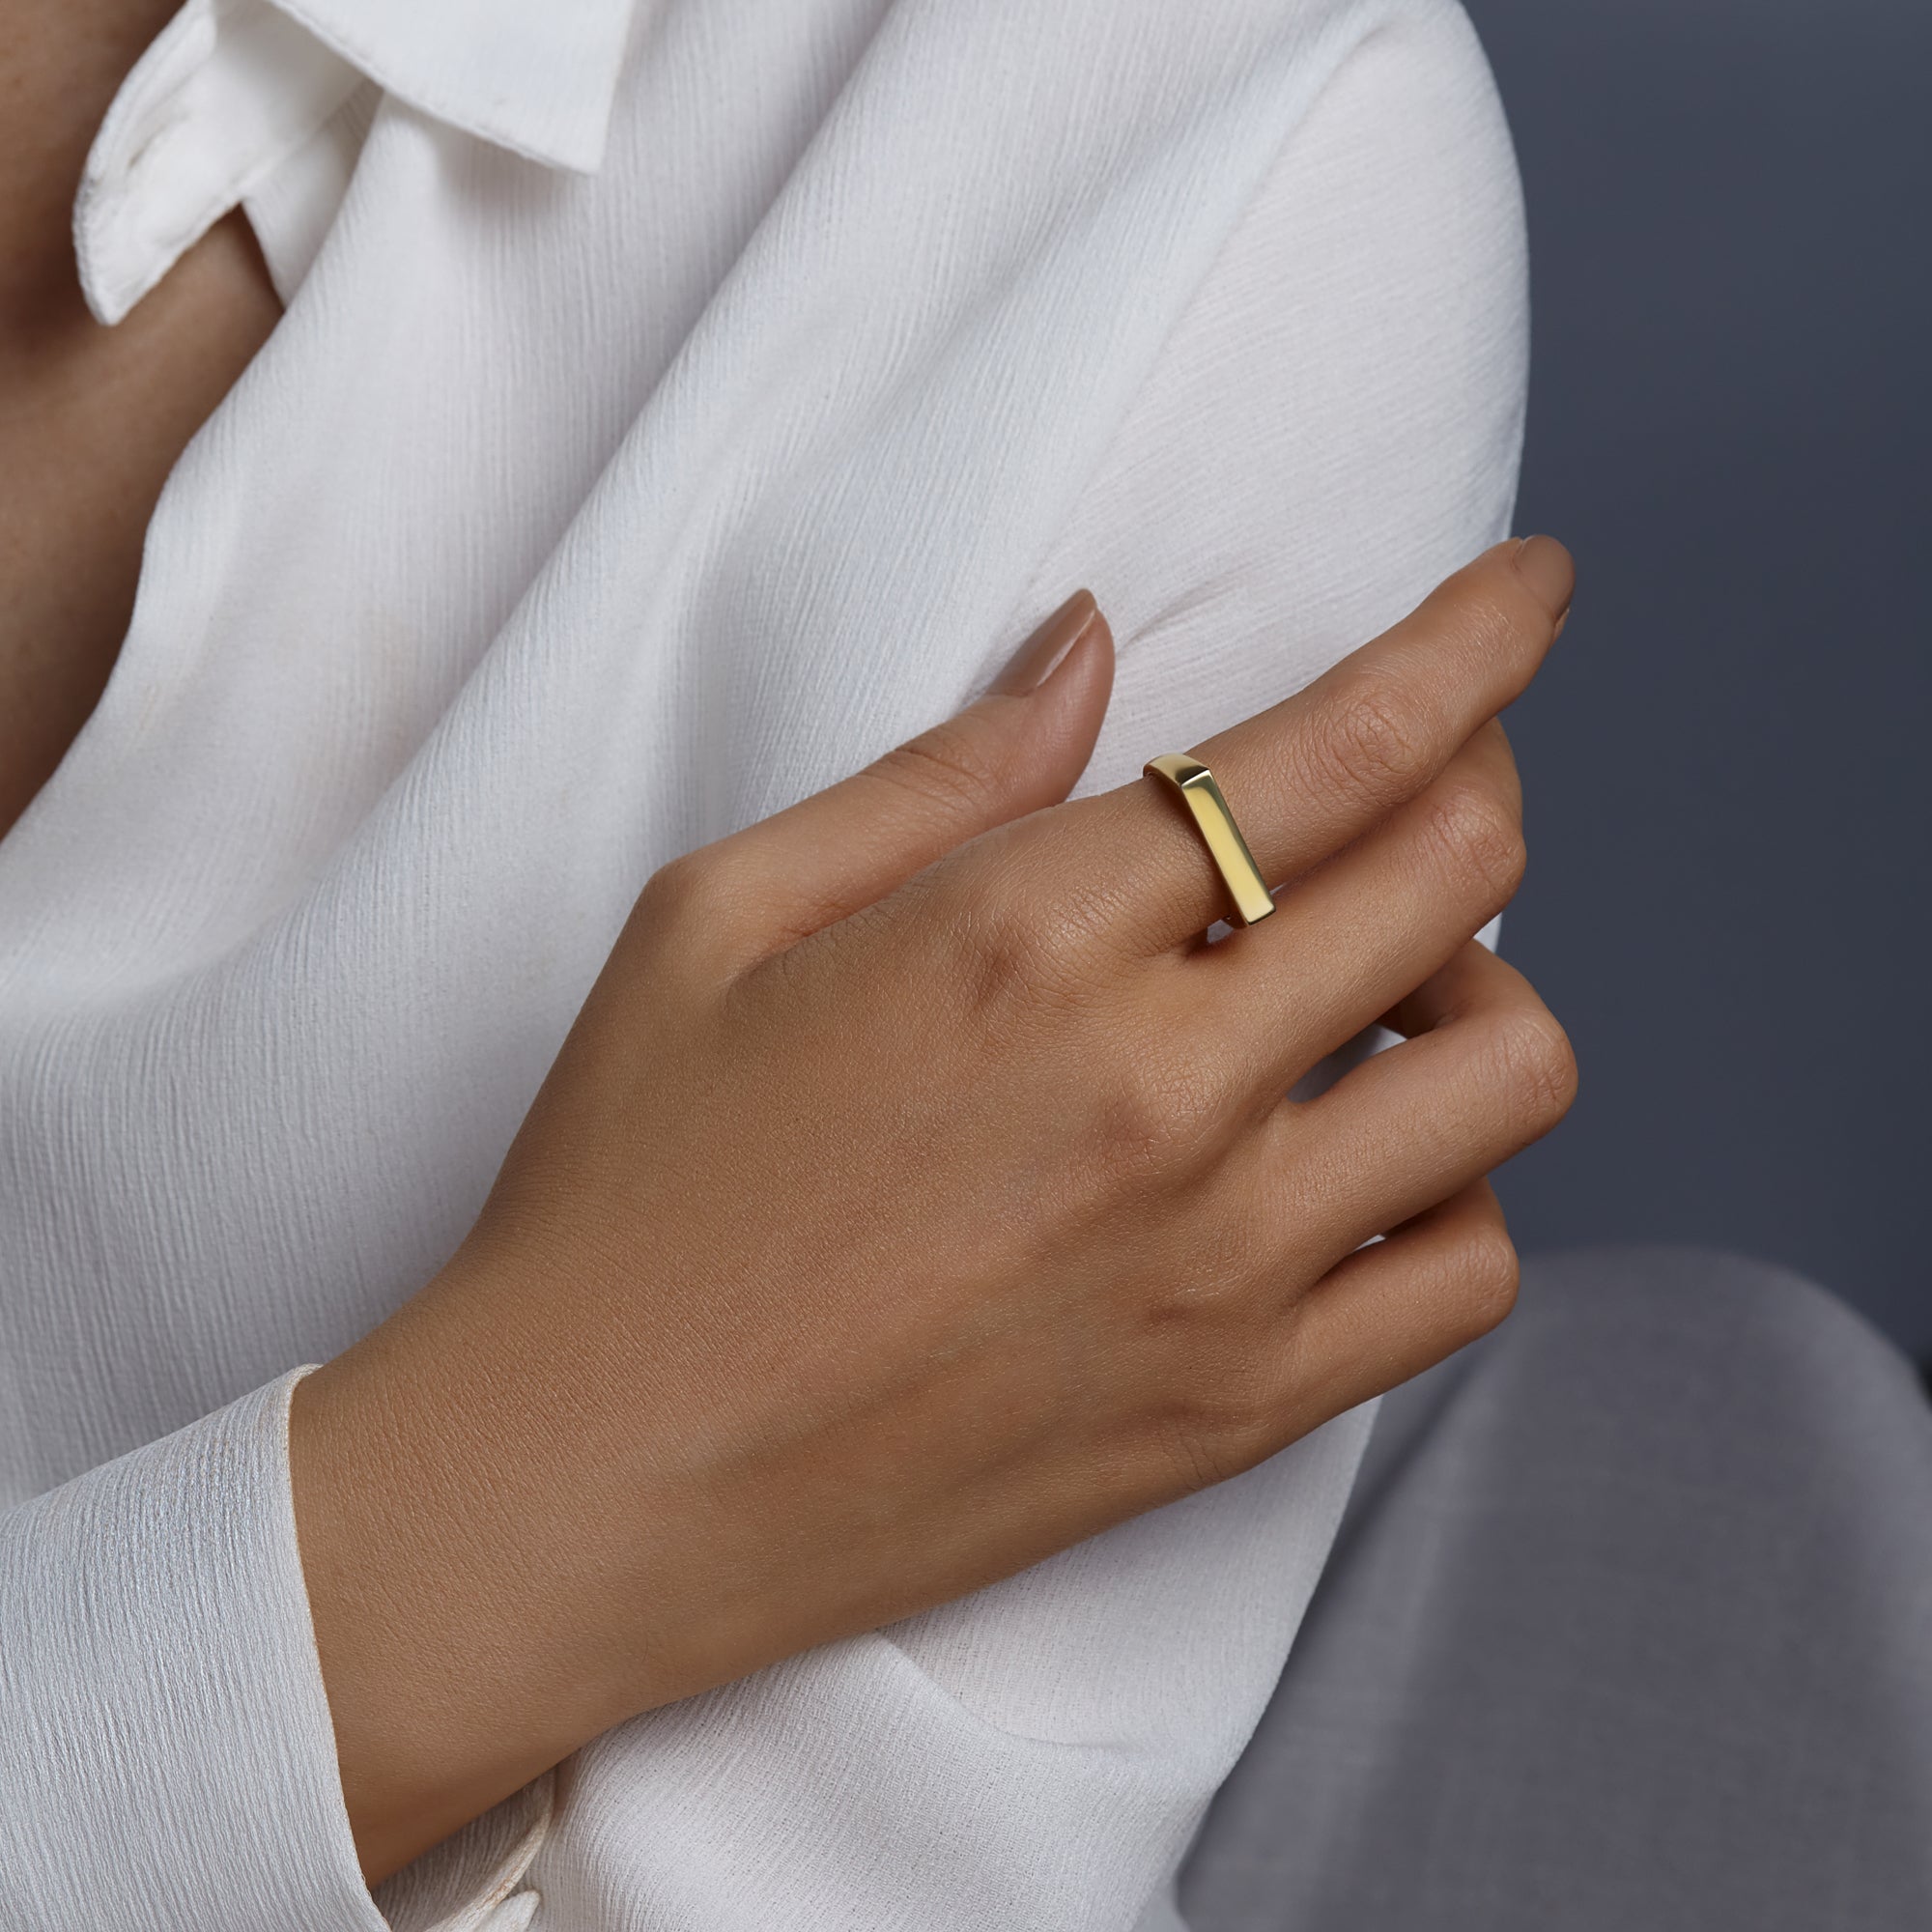 Gold Plated Signet Ring - Minimalist and Timeless Jewelry Bijou Her